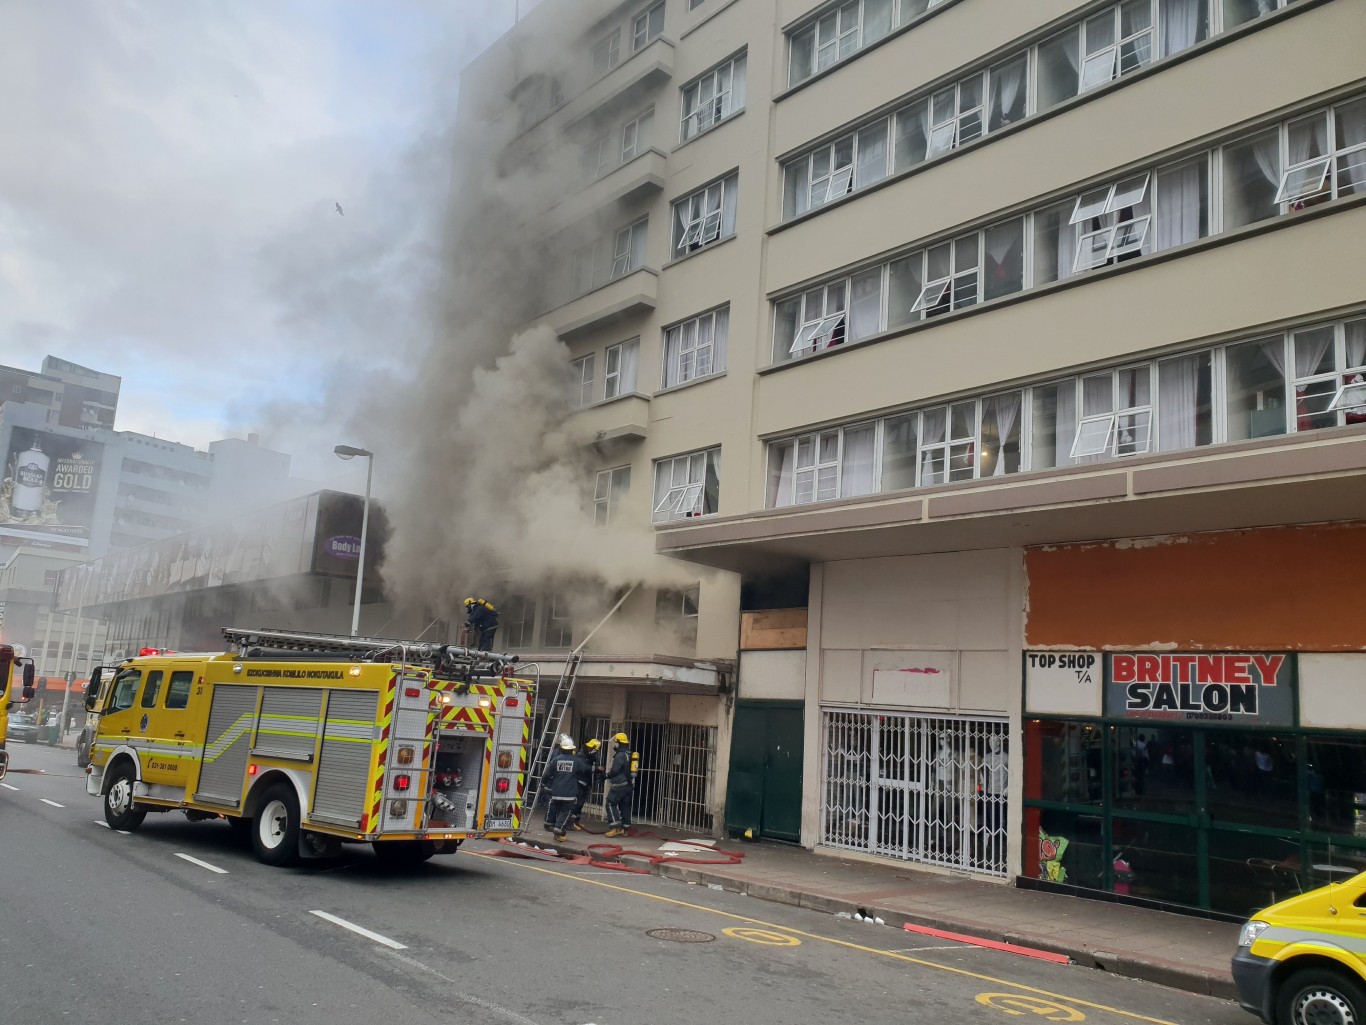 A Fire has broken out in a hotel in West Street between Point Road and Gillespie Street in Durban